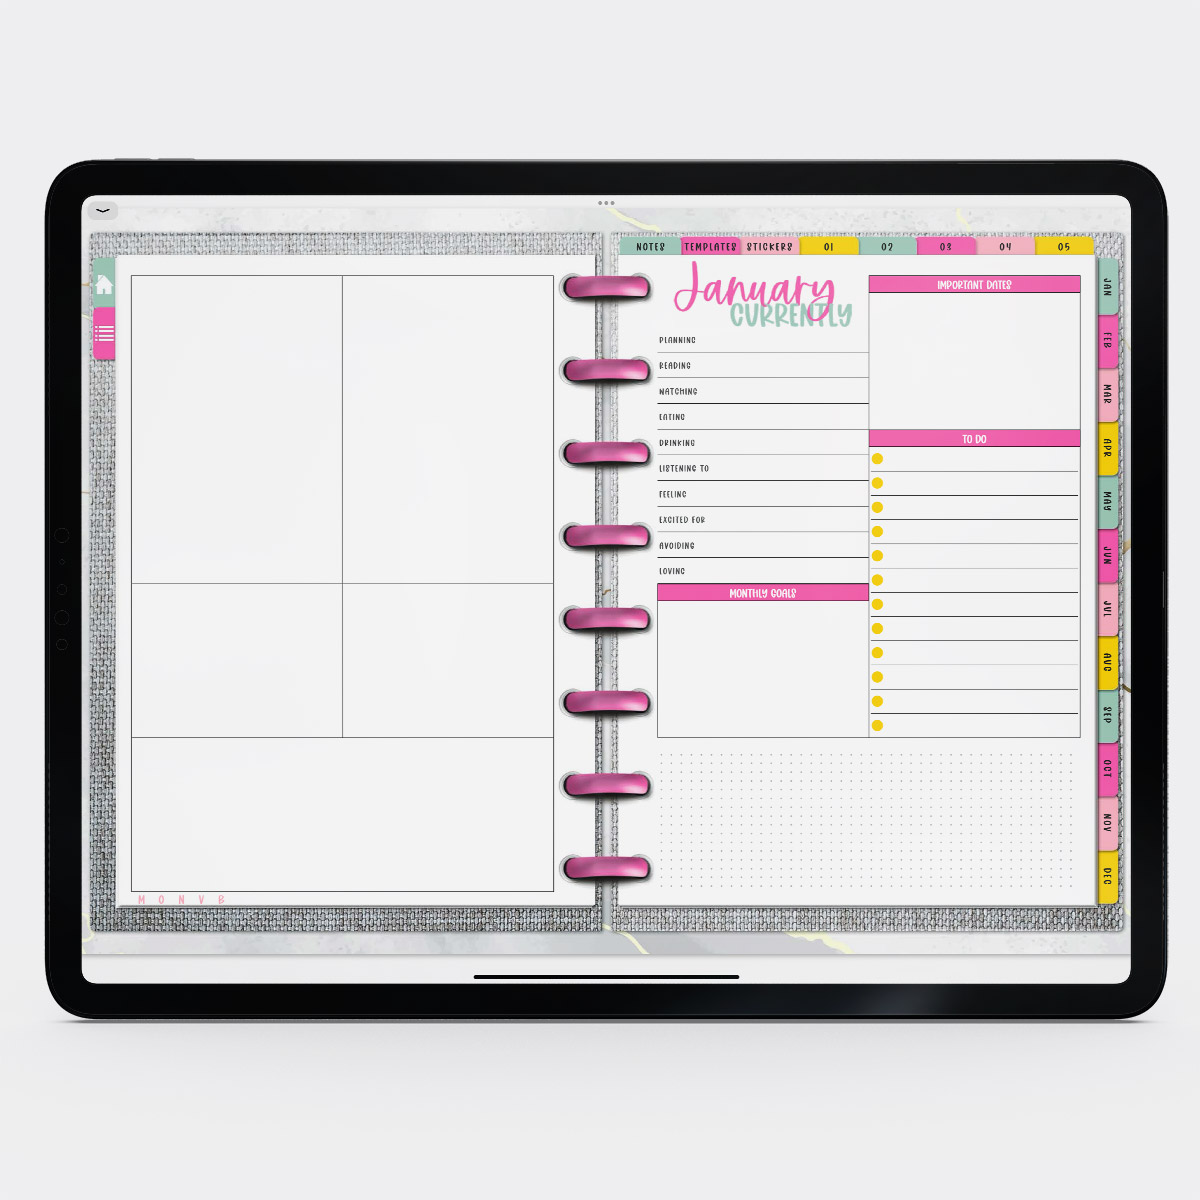 This image shows the free digital planner you can get in this post. It is open to the currently & monthly overview page for January.